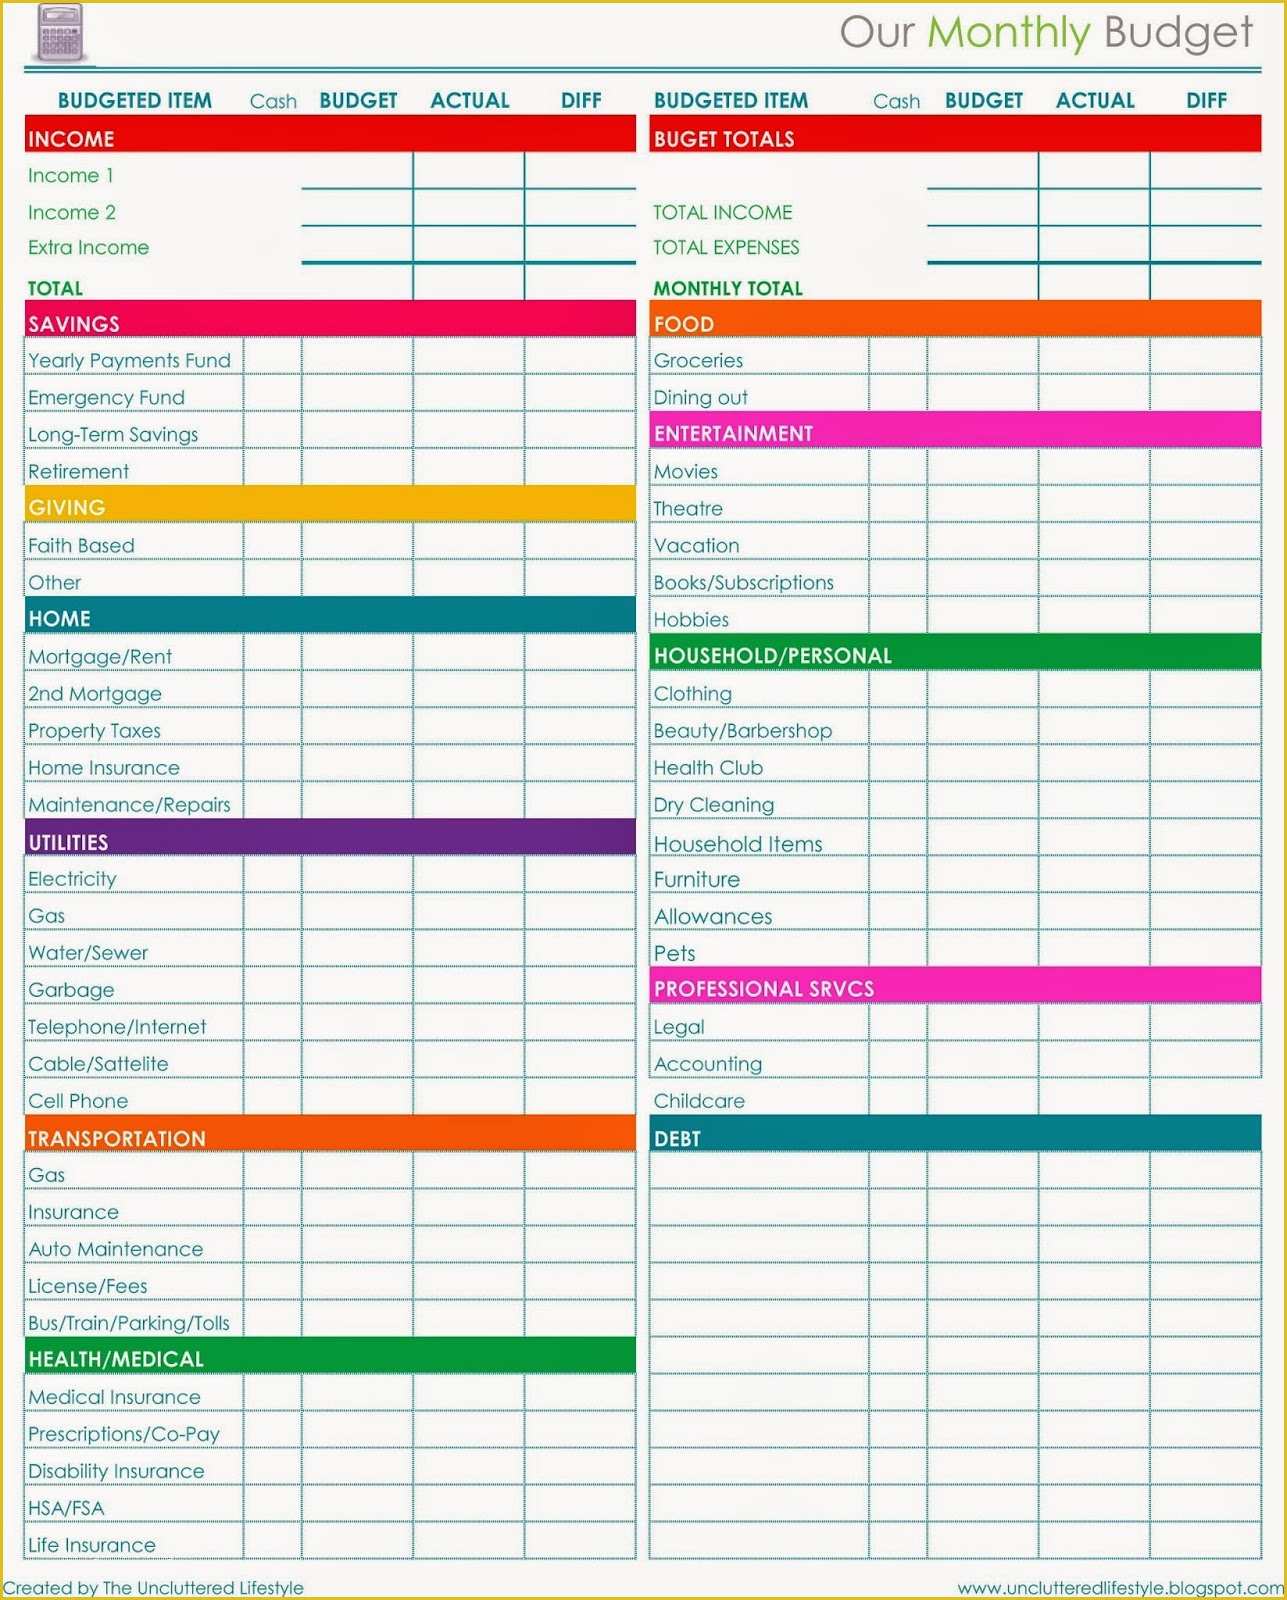 Free Online Budget Planner Template Of 2015 Planner More Free Printables Find Lifestyle